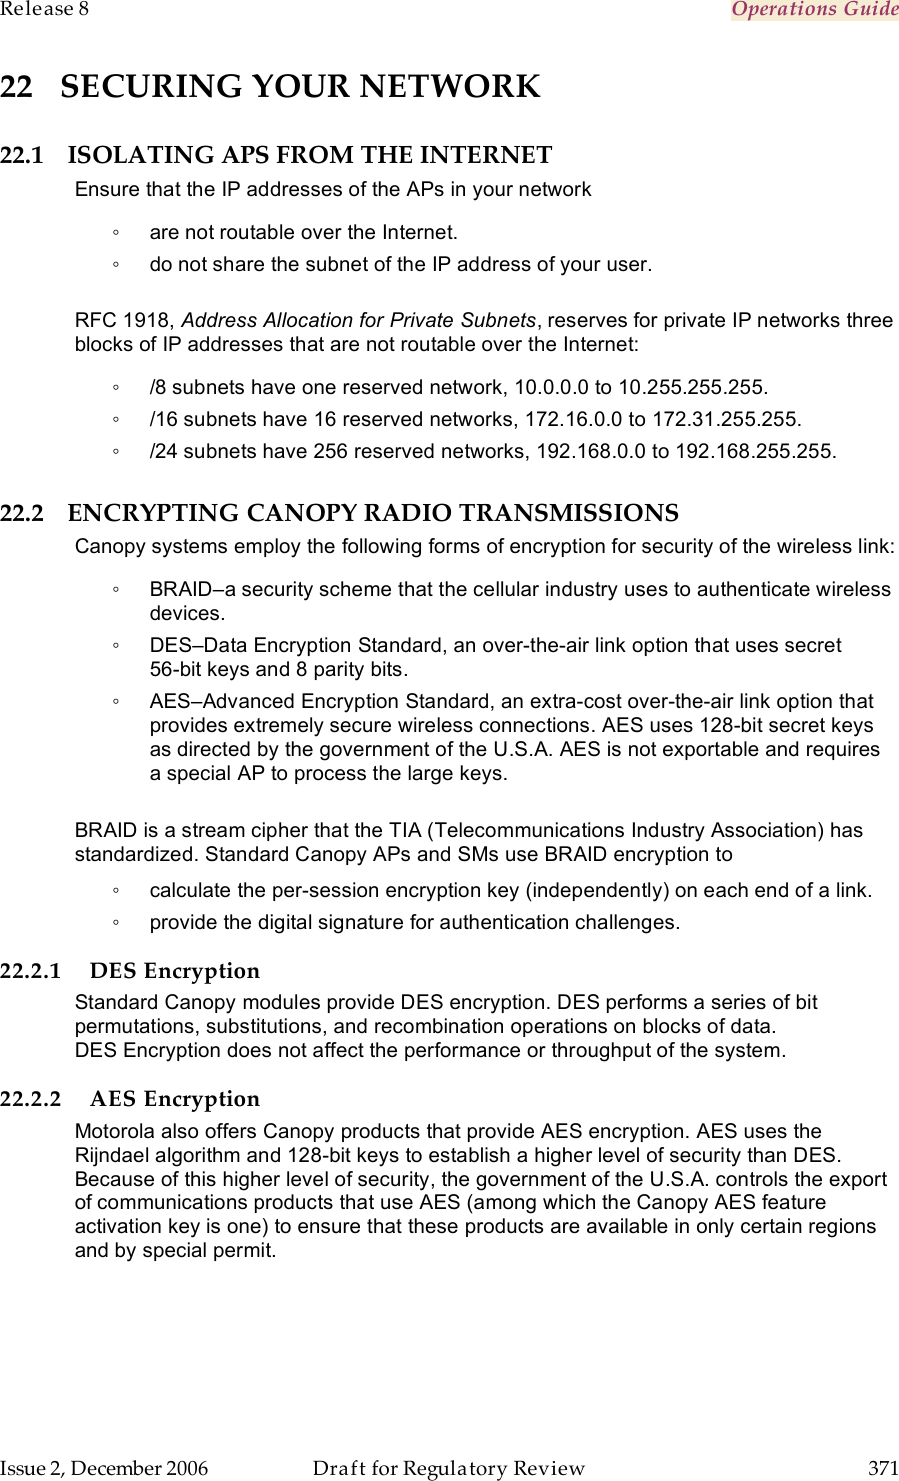 Release 8    Operations Guide   Issue 2, December 2006  Draft for Regulatory Review  371     22 SECURING YOUR NETWORK 22.1 ISOLATING APS FROM THE INTERNET Ensure that the IP addresses of the APs in your network ◦  are not routable over the Internet. ◦  do not share the subnet of the IP address of your user.  RFC 1918, Address Allocation for Private Subnets, reserves for private IP networks three blocks of IP addresses that are not routable over the Internet: ◦  /8 subnets have one reserved network, 10.0.0.0 to 10.255.255.255. ◦  /16 subnets have 16 reserved networks, 172.16.0.0 to 172.31.255.255. ◦  /24 subnets have 256 reserved networks, 192.168.0.0 to 192.168.255.255. 22.2 ENCRYPTING CANOPY RADIO TRANSMISSIONS Canopy systems employ the following forms of encryption for security of the wireless link: ◦  BRAID–a security scheme that the cellular industry uses to authenticate wireless devices. ◦  DES–Data Encryption Standard, an over-the-air link option that uses secret  56-bit keys and 8 parity bits. ◦  AES–Advanced Encryption Standard, an extra-cost over-the-air link option that provides extremely secure wireless connections. AES uses 128-bit secret keys as directed by the government of the U.S.A. AES is not exportable and requires a special AP to process the large keys.  BRAID is a stream cipher that the TIA (Telecommunications Industry Association) has standardized. Standard Canopy APs and SMs use BRAID encryption to ◦  calculate the per-session encryption key (independently) on each end of a link. ◦  provide the digital signature for authentication challenges. 22.2.1 DES Encryption Standard Canopy modules provide DES encryption. DES performs a series of bit permutations, substitutions, and recombination operations on blocks of data. DES Encryption does not affect the performance or throughput of the system. 22.2.2 AES Encryption Motorola also offers Canopy products that provide AES encryption. AES uses the Rijndael algorithm and 128-bit keys to establish a higher level of security than DES. Because of this higher level of security, the government of the U.S.A. controls the export of communications products that use AES (among which the Canopy AES feature activation key is one) to ensure that these products are available in only certain regions and by special permit.  